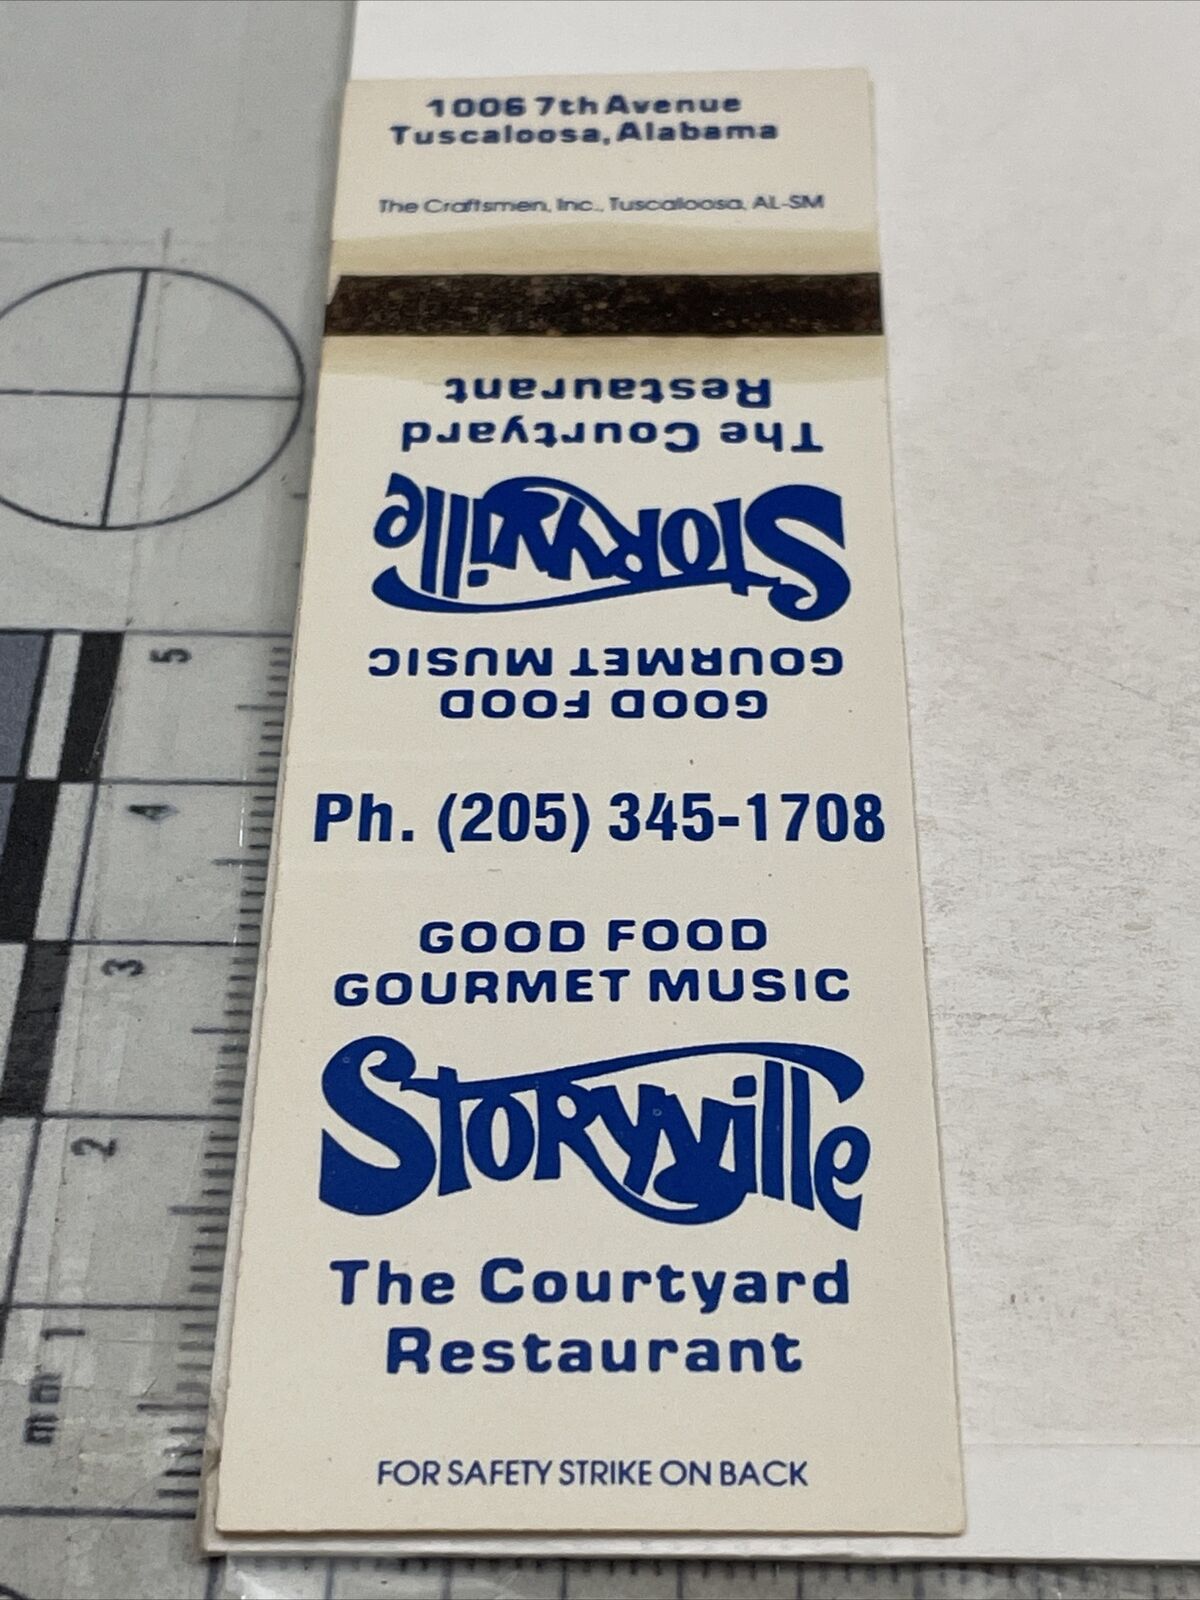 Vintage Matchbook Cover  Storyville  The Courtyard Restaurant Tuscaloosa, AL gmg